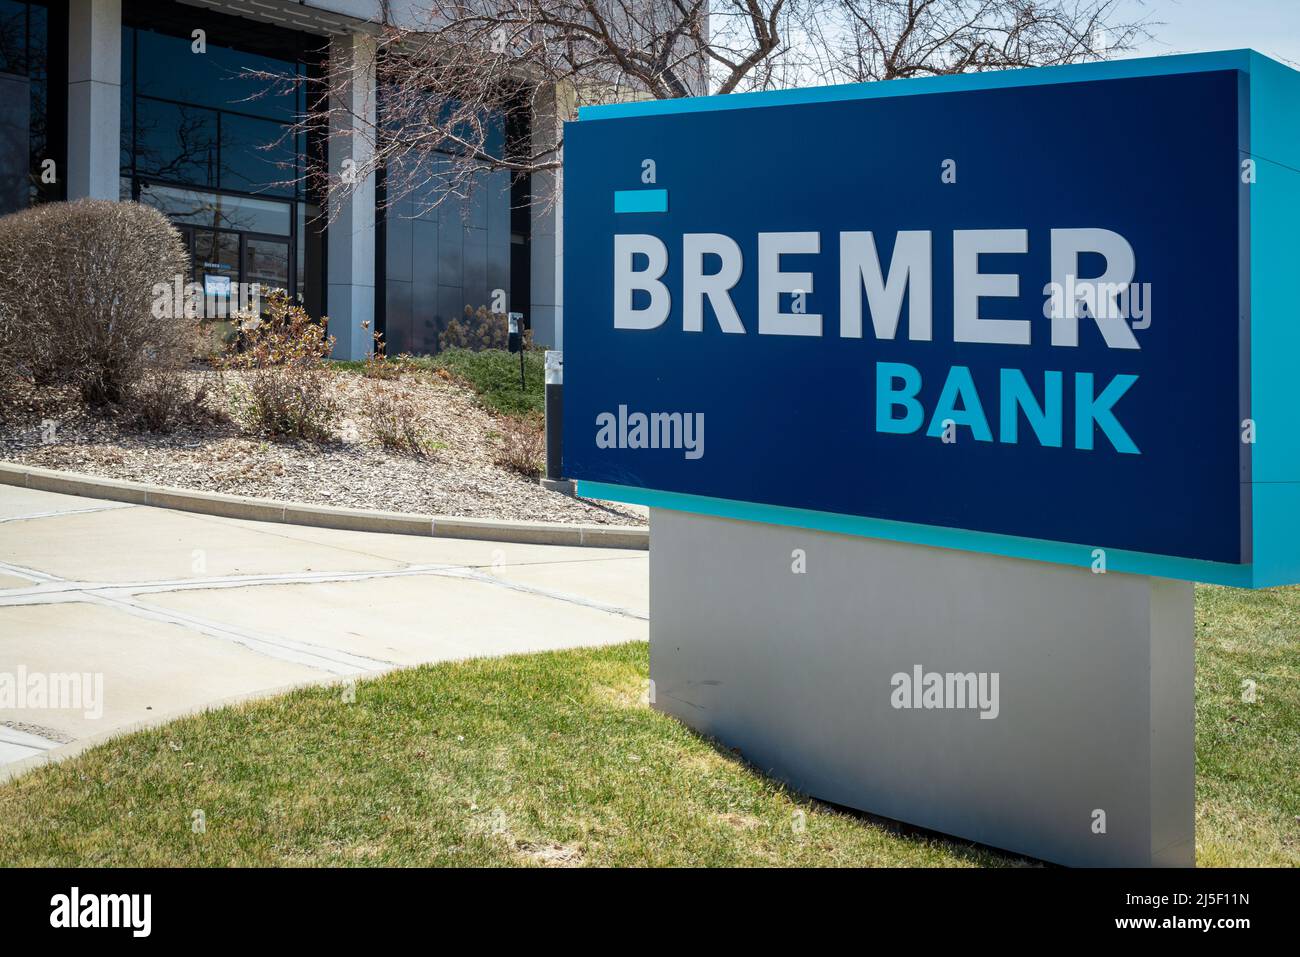 SAINT CLOUD, MINNESOTA - February 19, 2022: Bremer Bank, located at 1100 W St. Germain Street, is photographed. Stock Photo